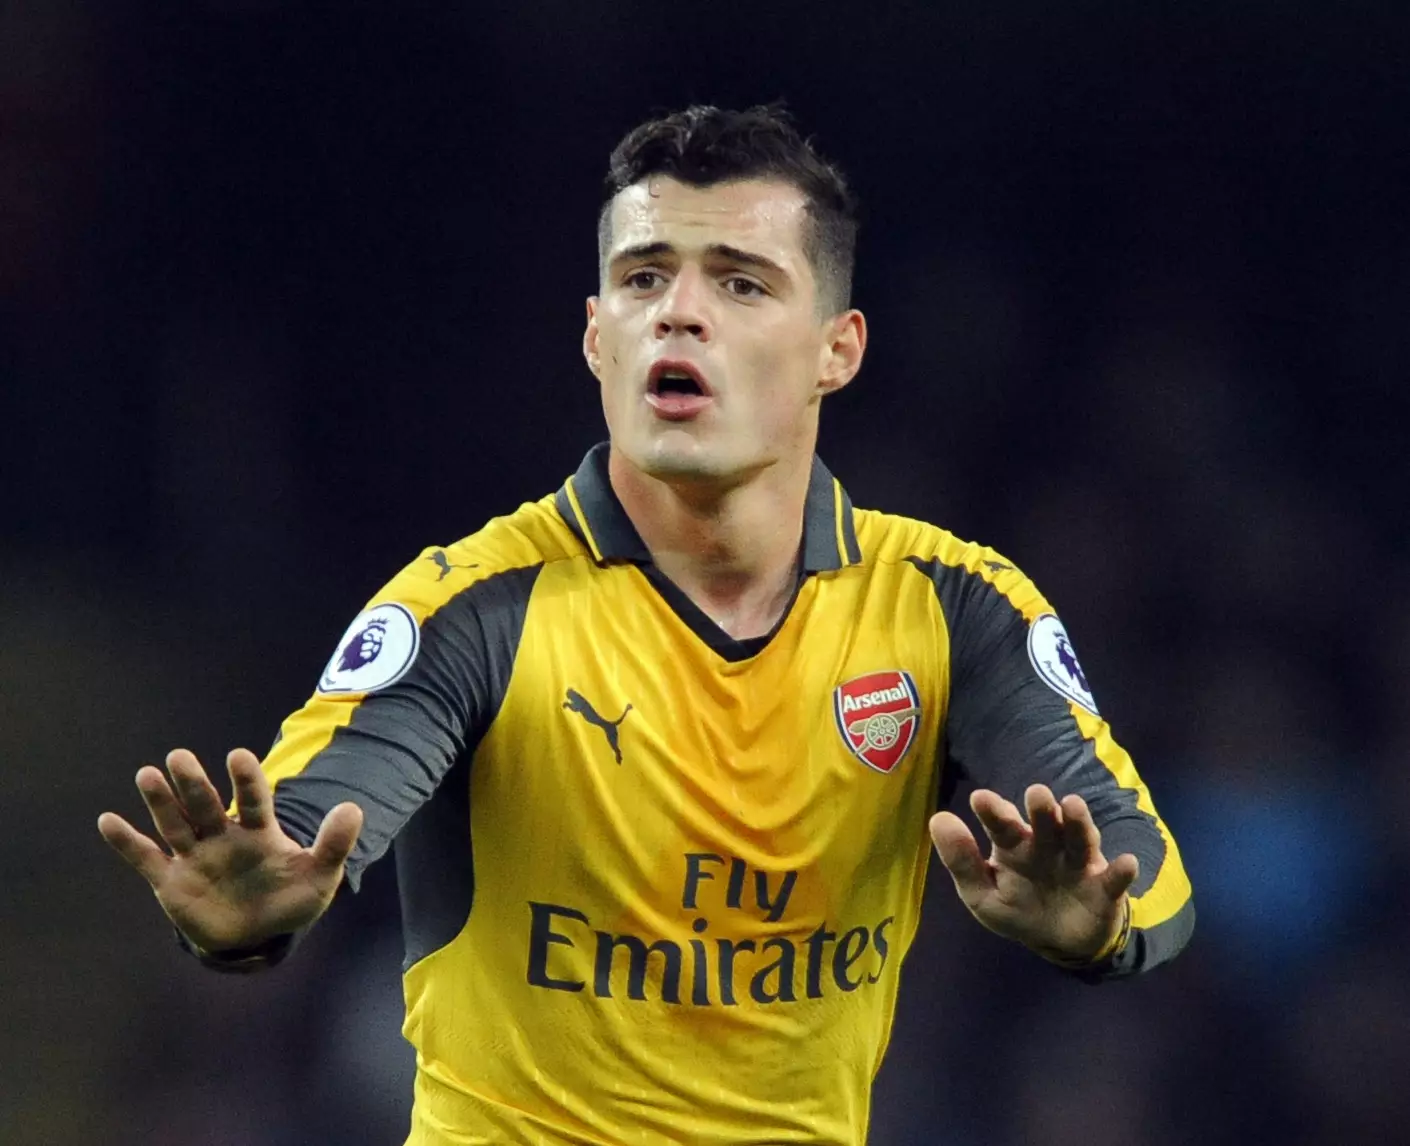 Granit Xhaka Accused Of Racially Abusing Member Of Staff At Heathrow Airport